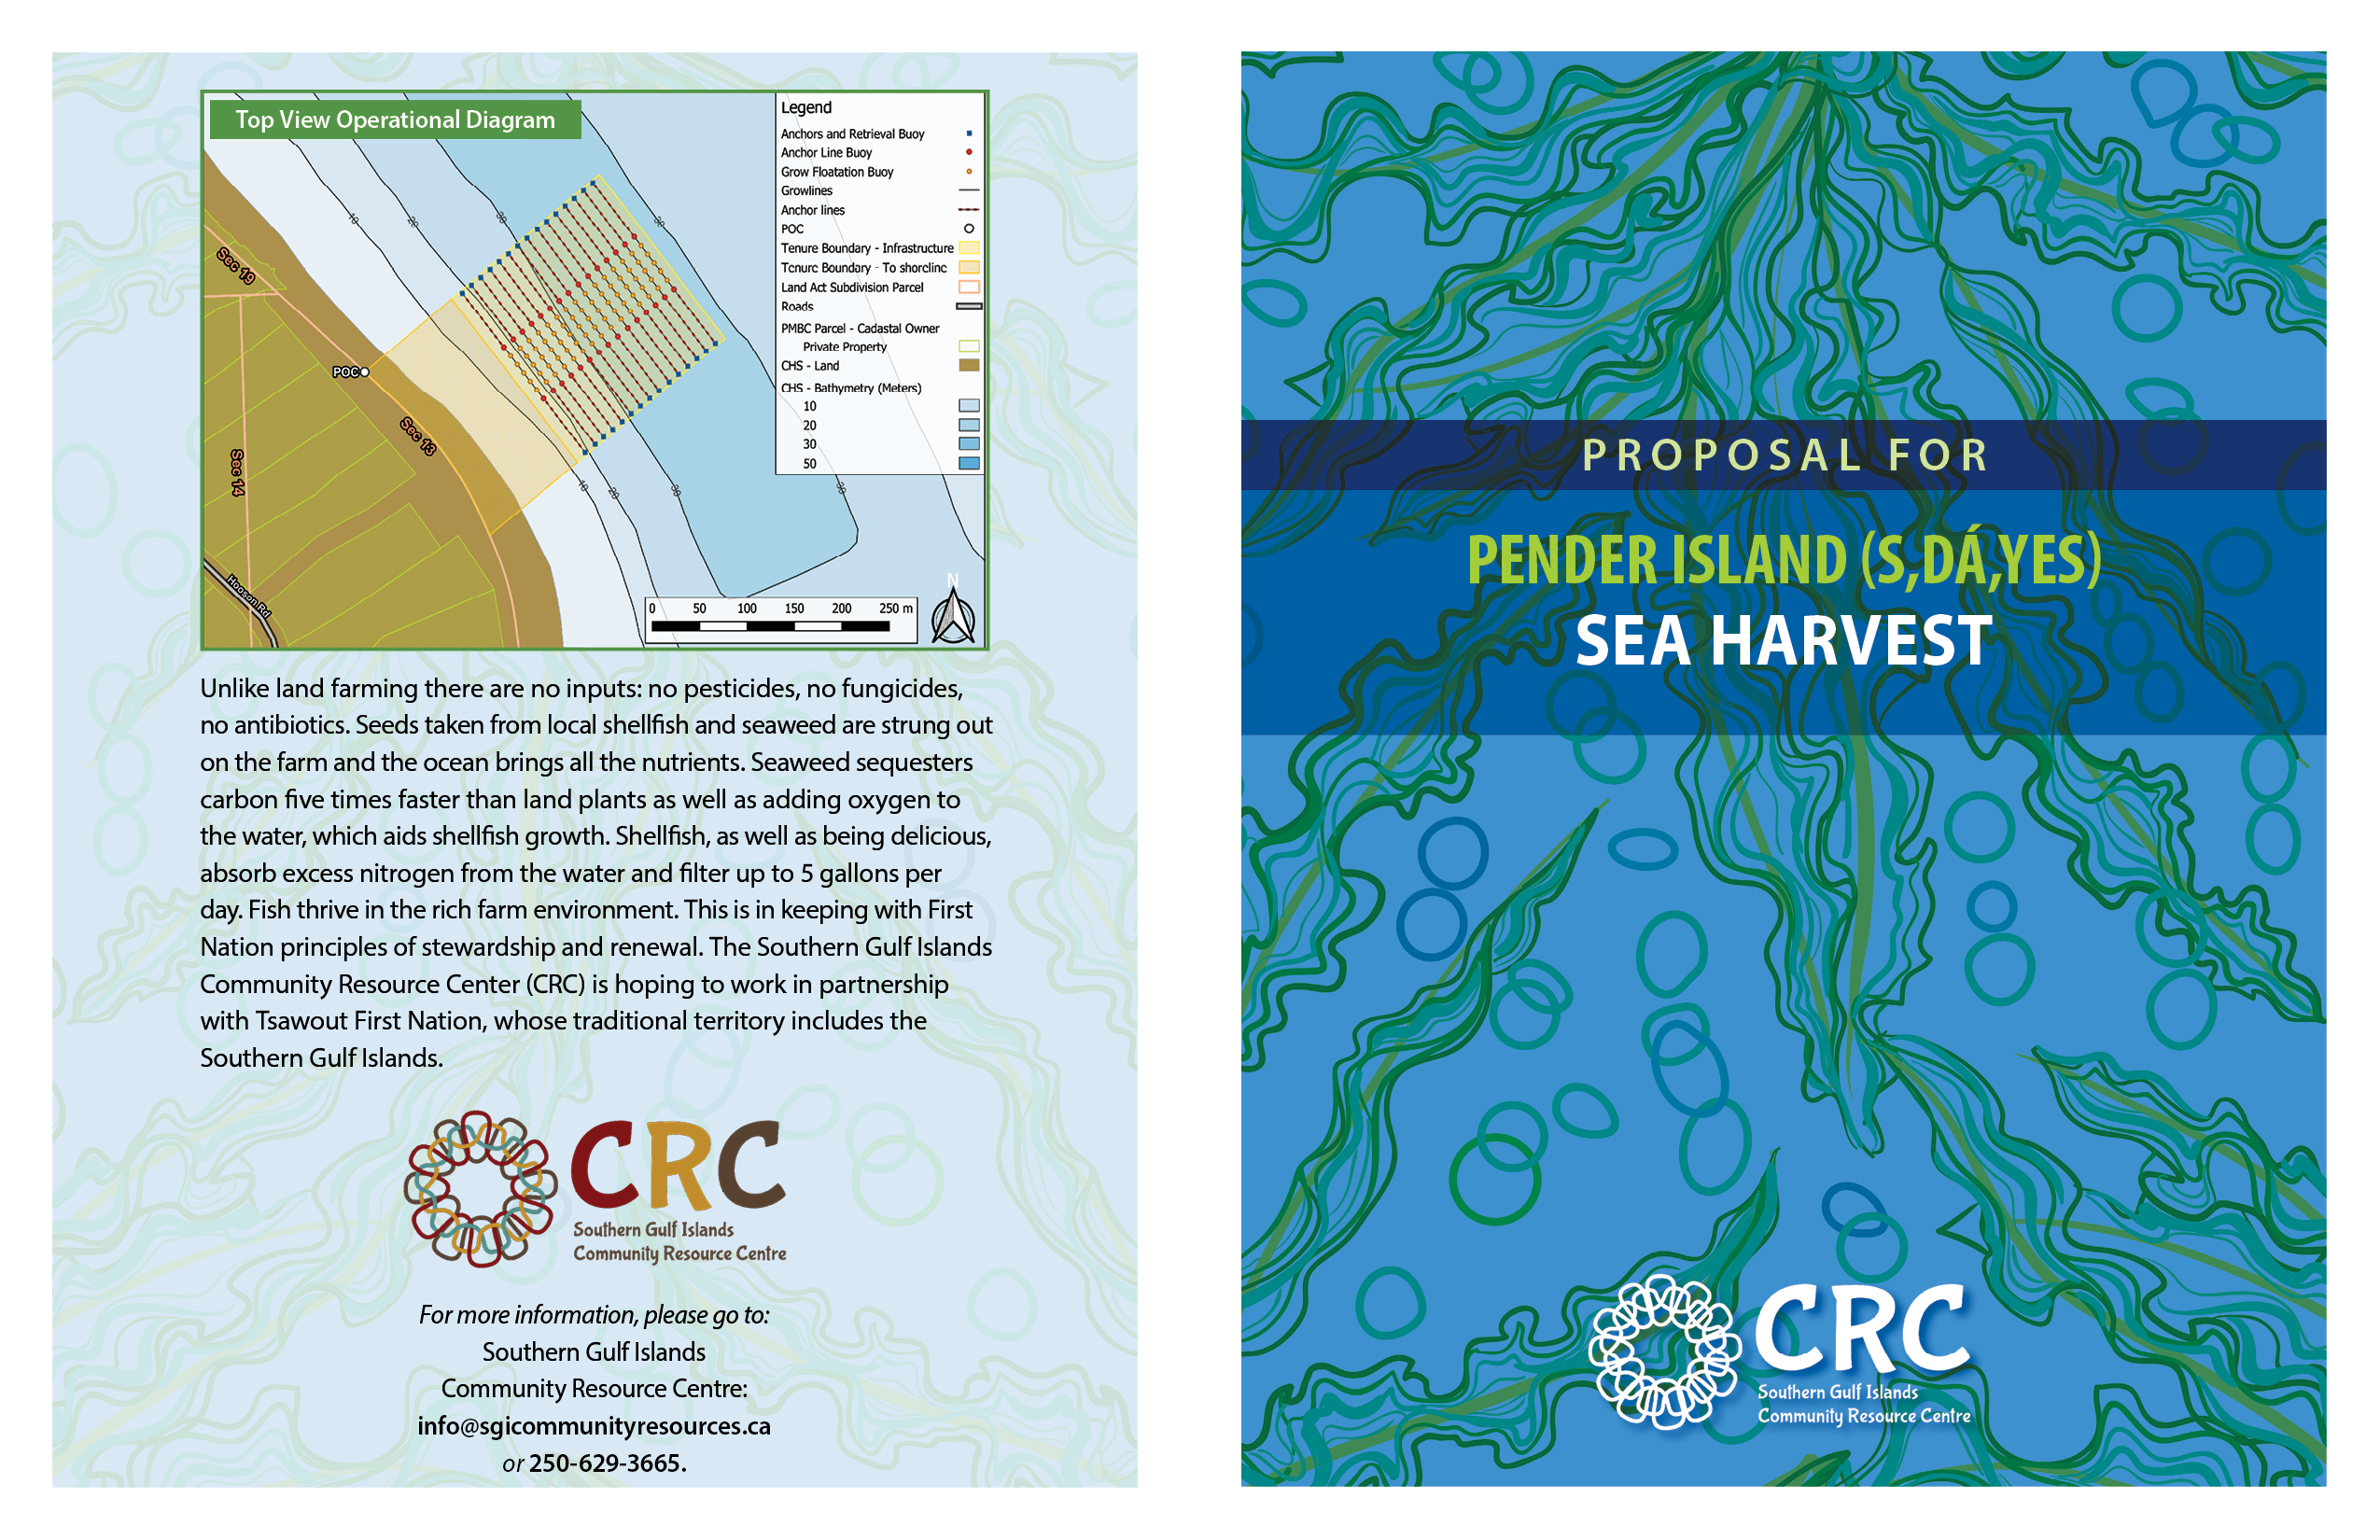 Pender Island sea harvest proposal blue and green cover page and description